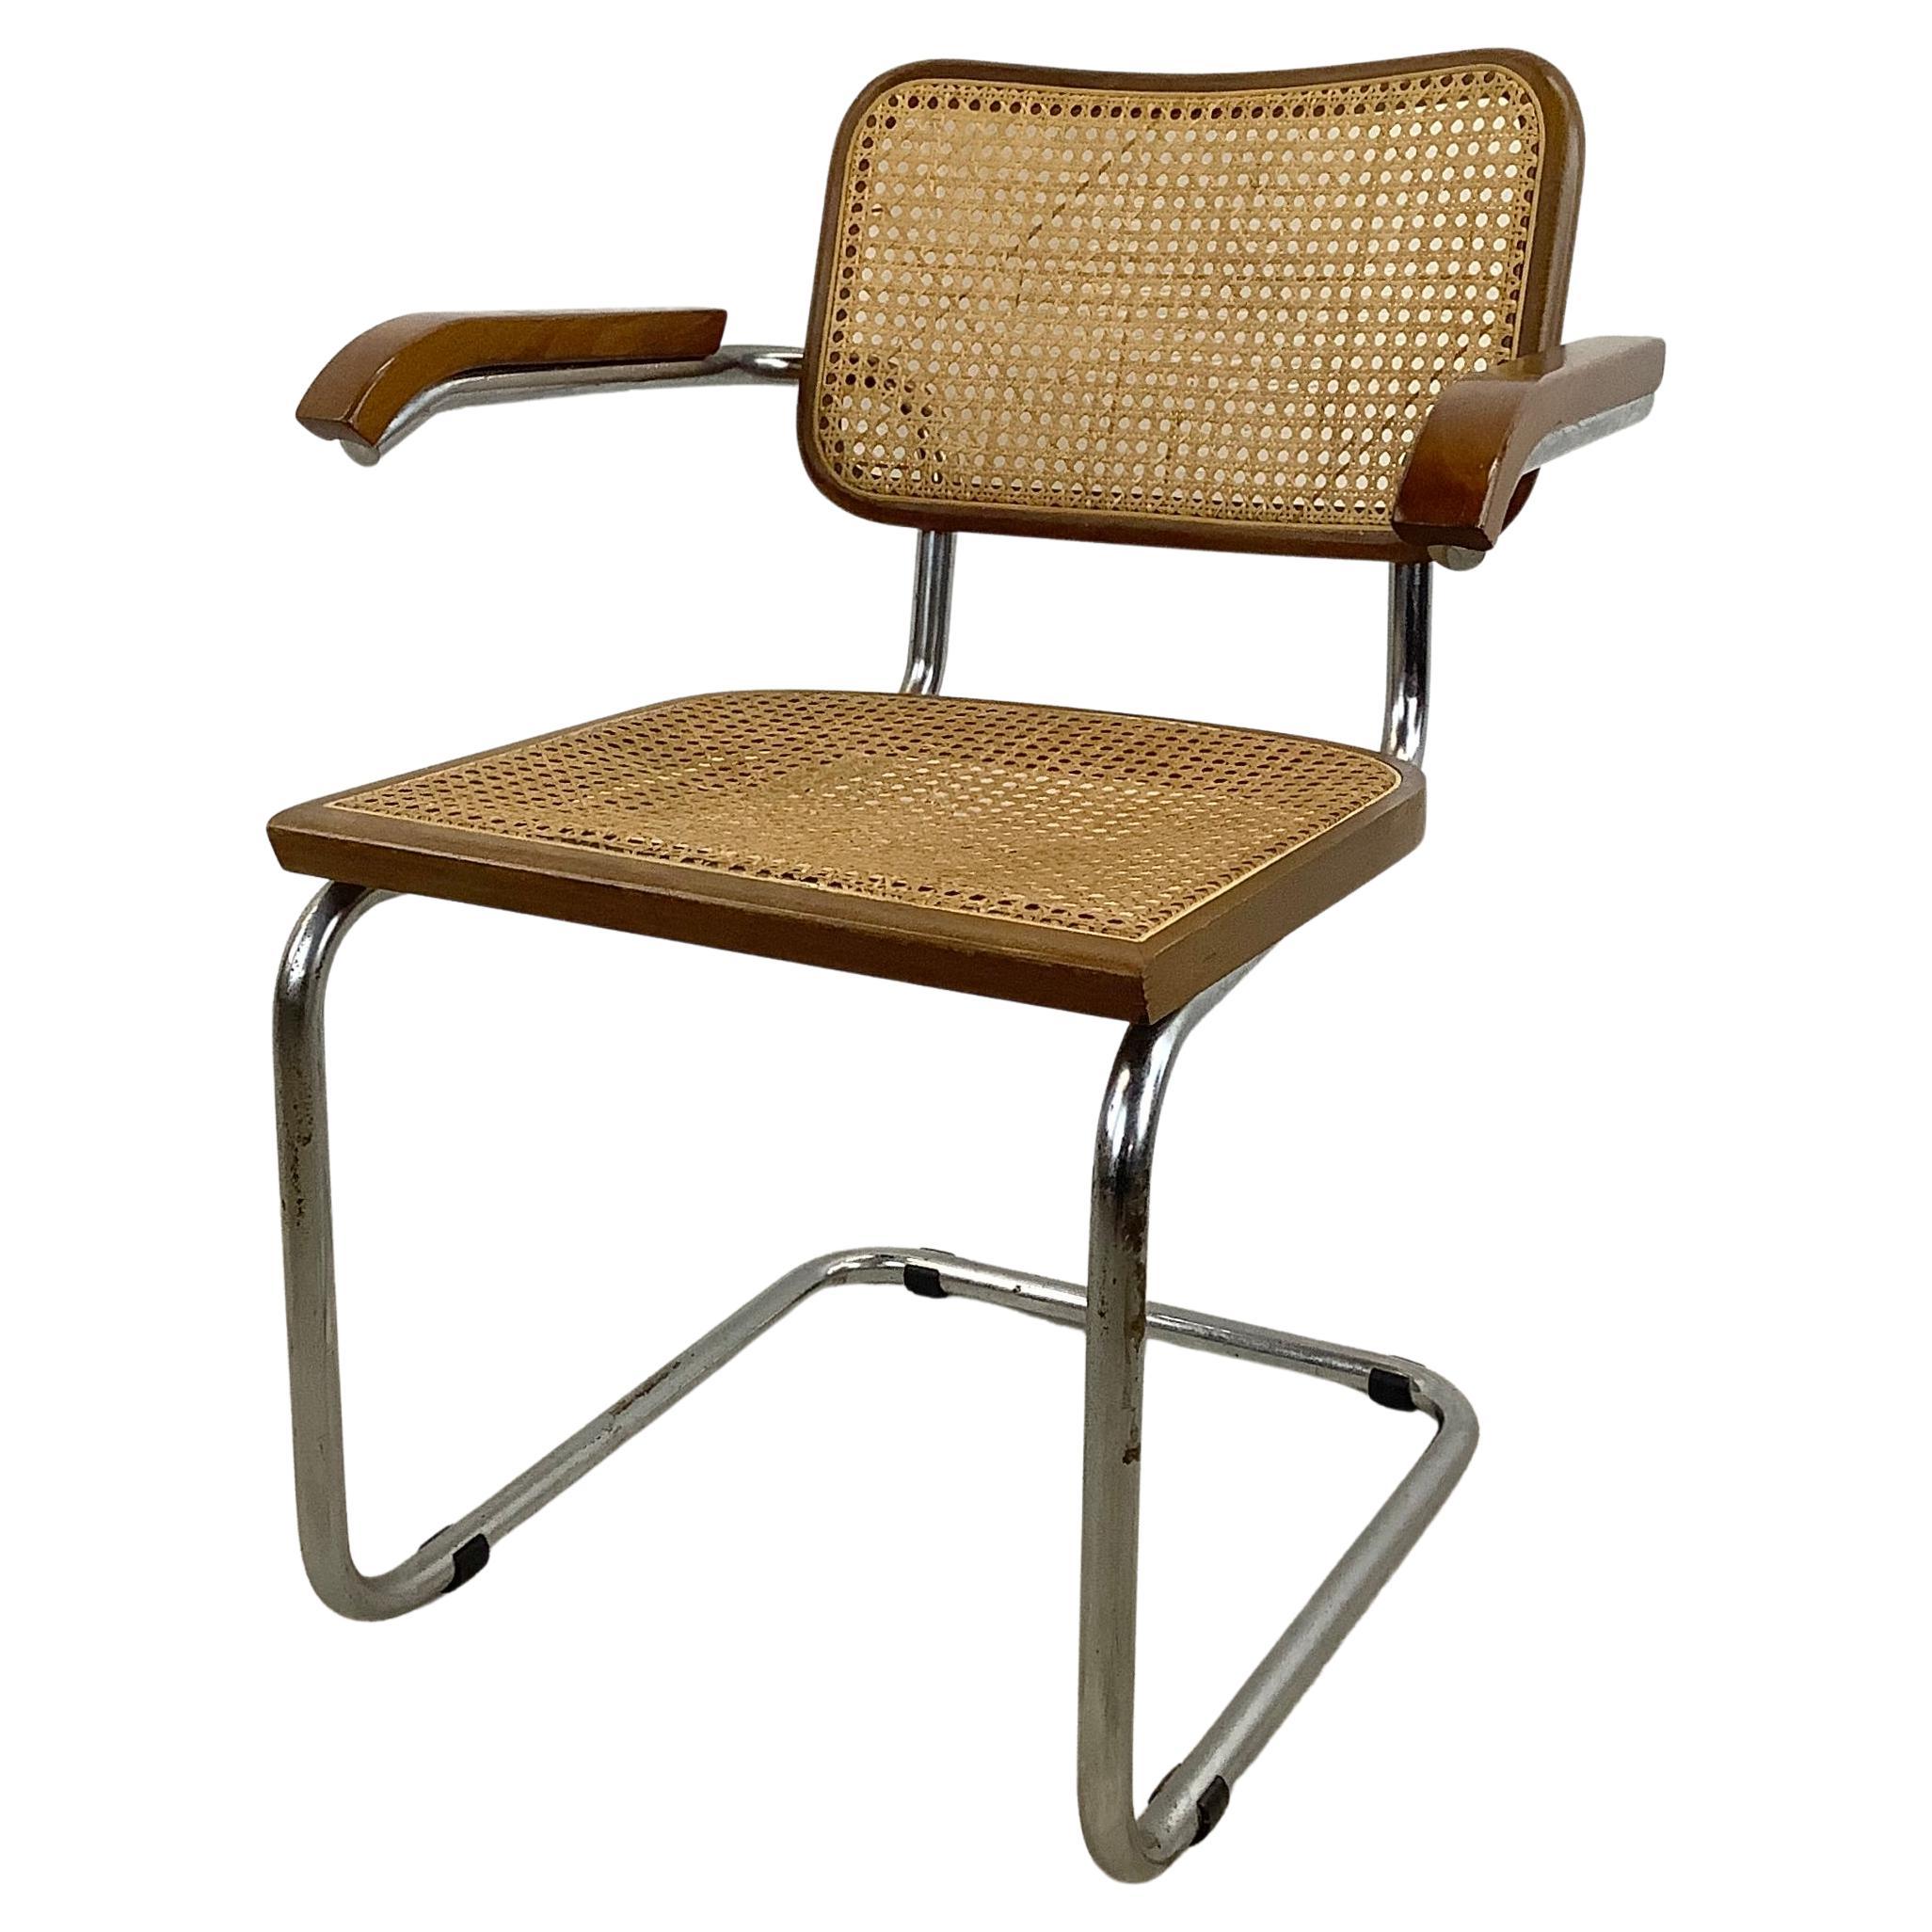 Midcentury Cesca Style Cane Seat Dining Chair, Made in Italy